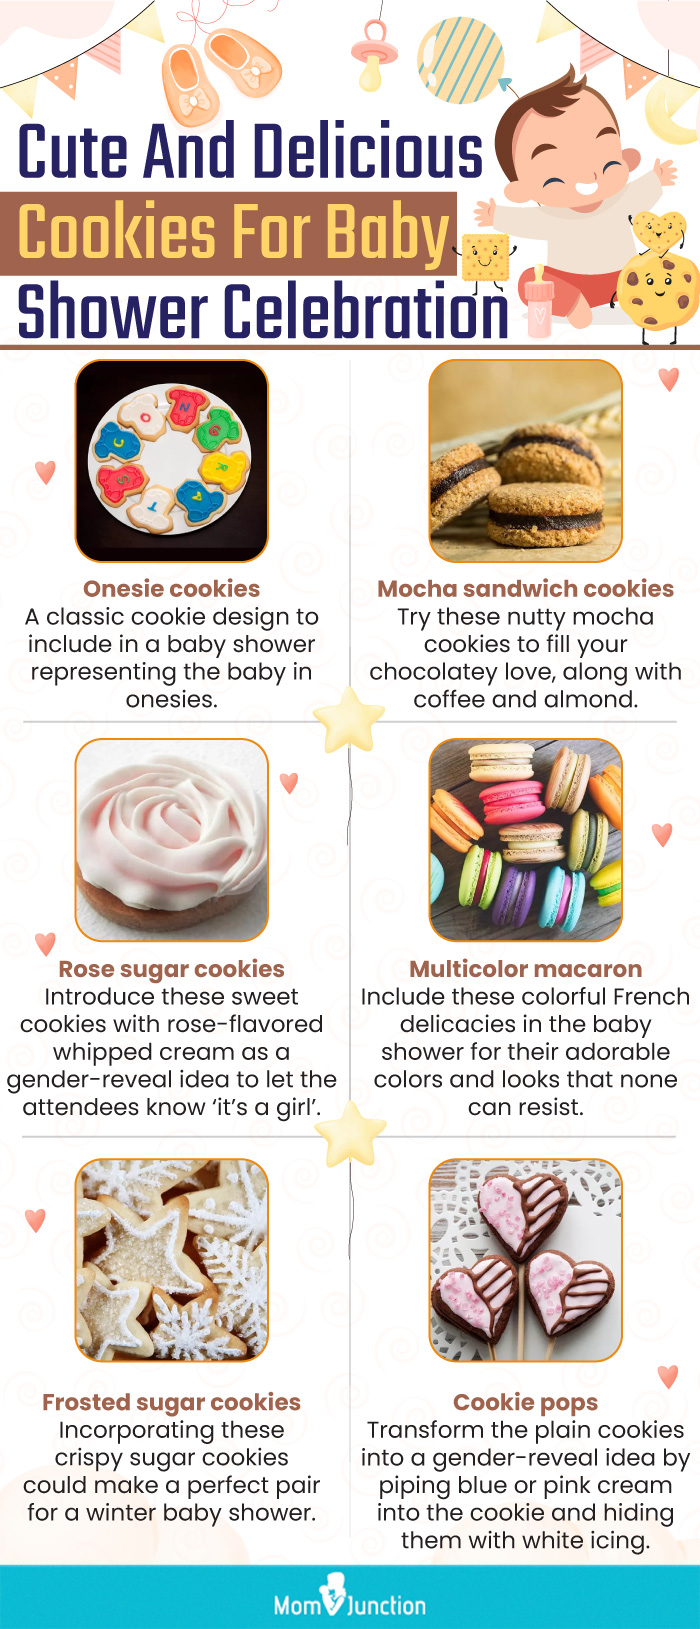 Cute And Delicious Cookies For Baby Shower Celebration (infographic)